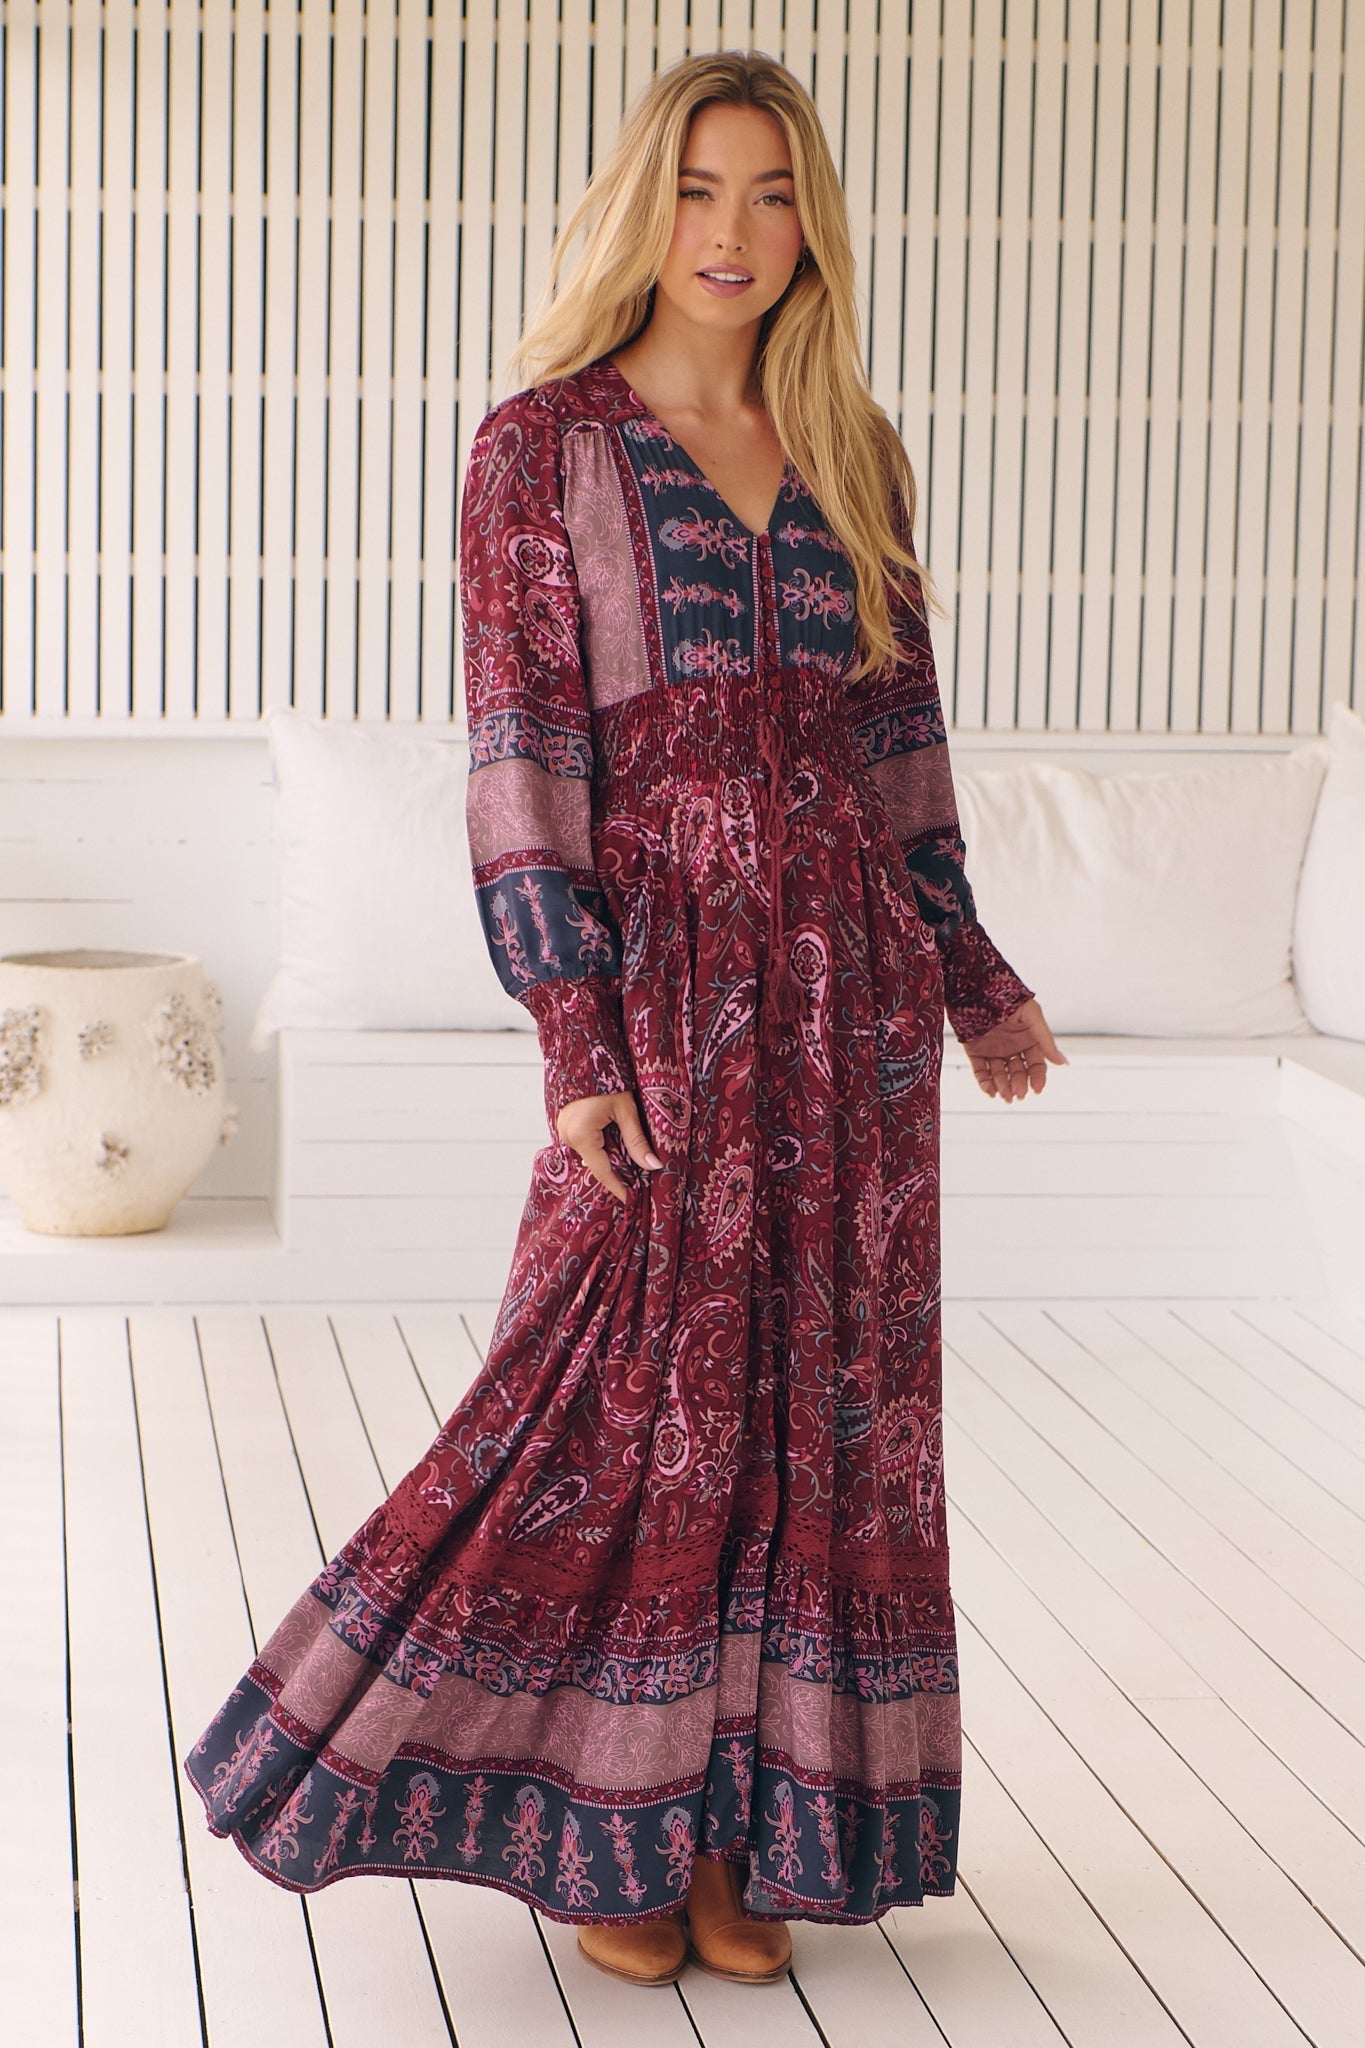 JAASE - Sabrina Maxi Dress: A Line Button Through Dress with Long Sleeves in Sadie Print